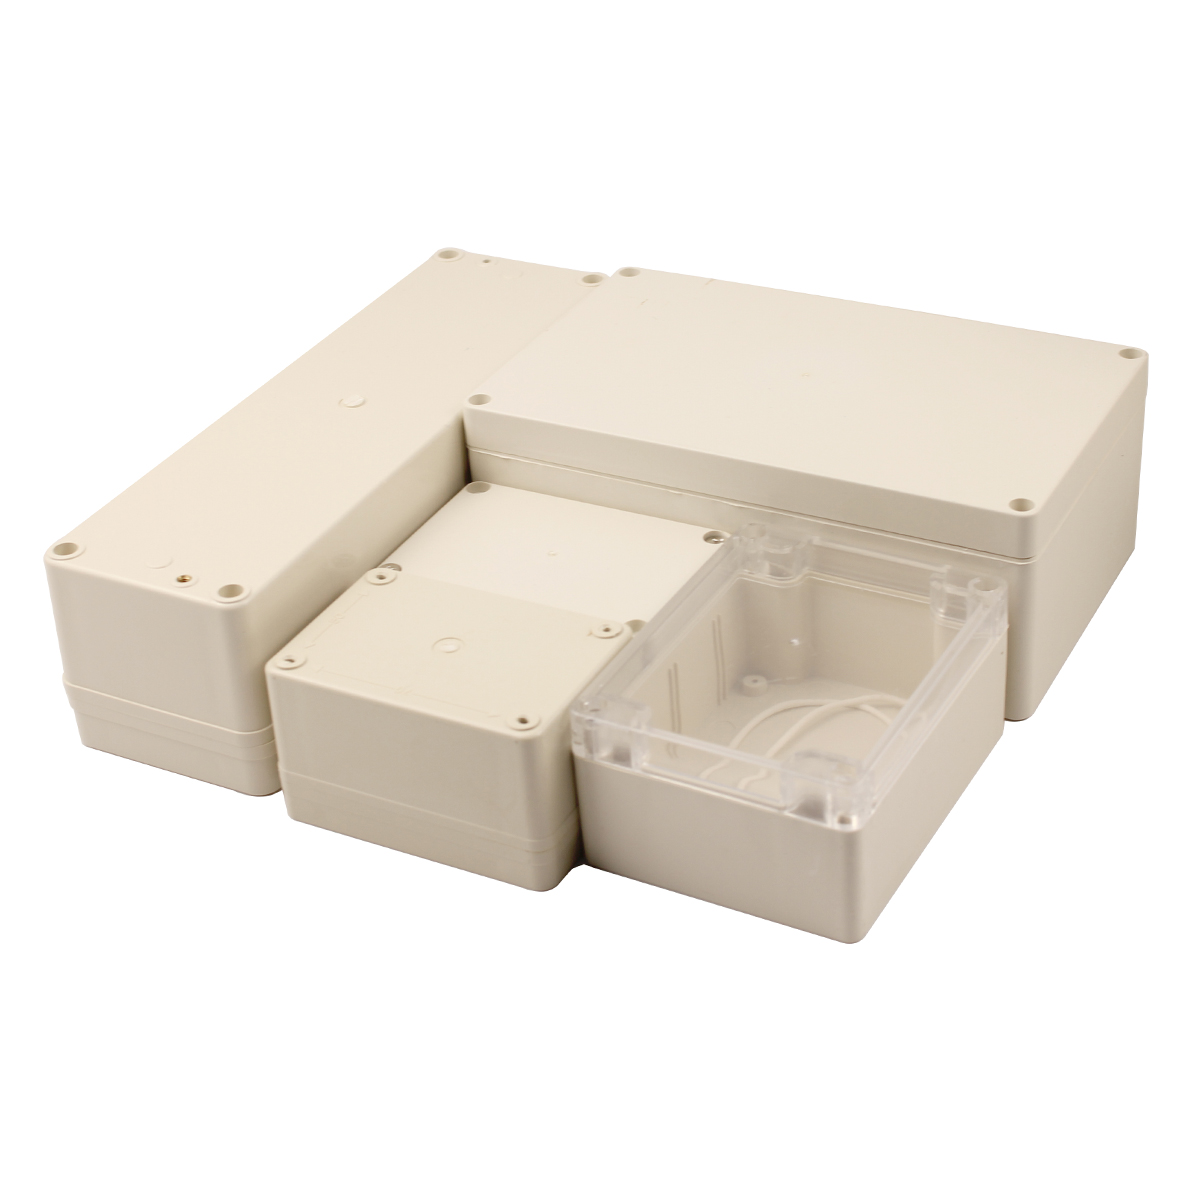 1PC DIY ABS Electronic Plastic Box Waterproof Junction Box Electrical Transparent Cover Enclosure Waterproof Junction Case